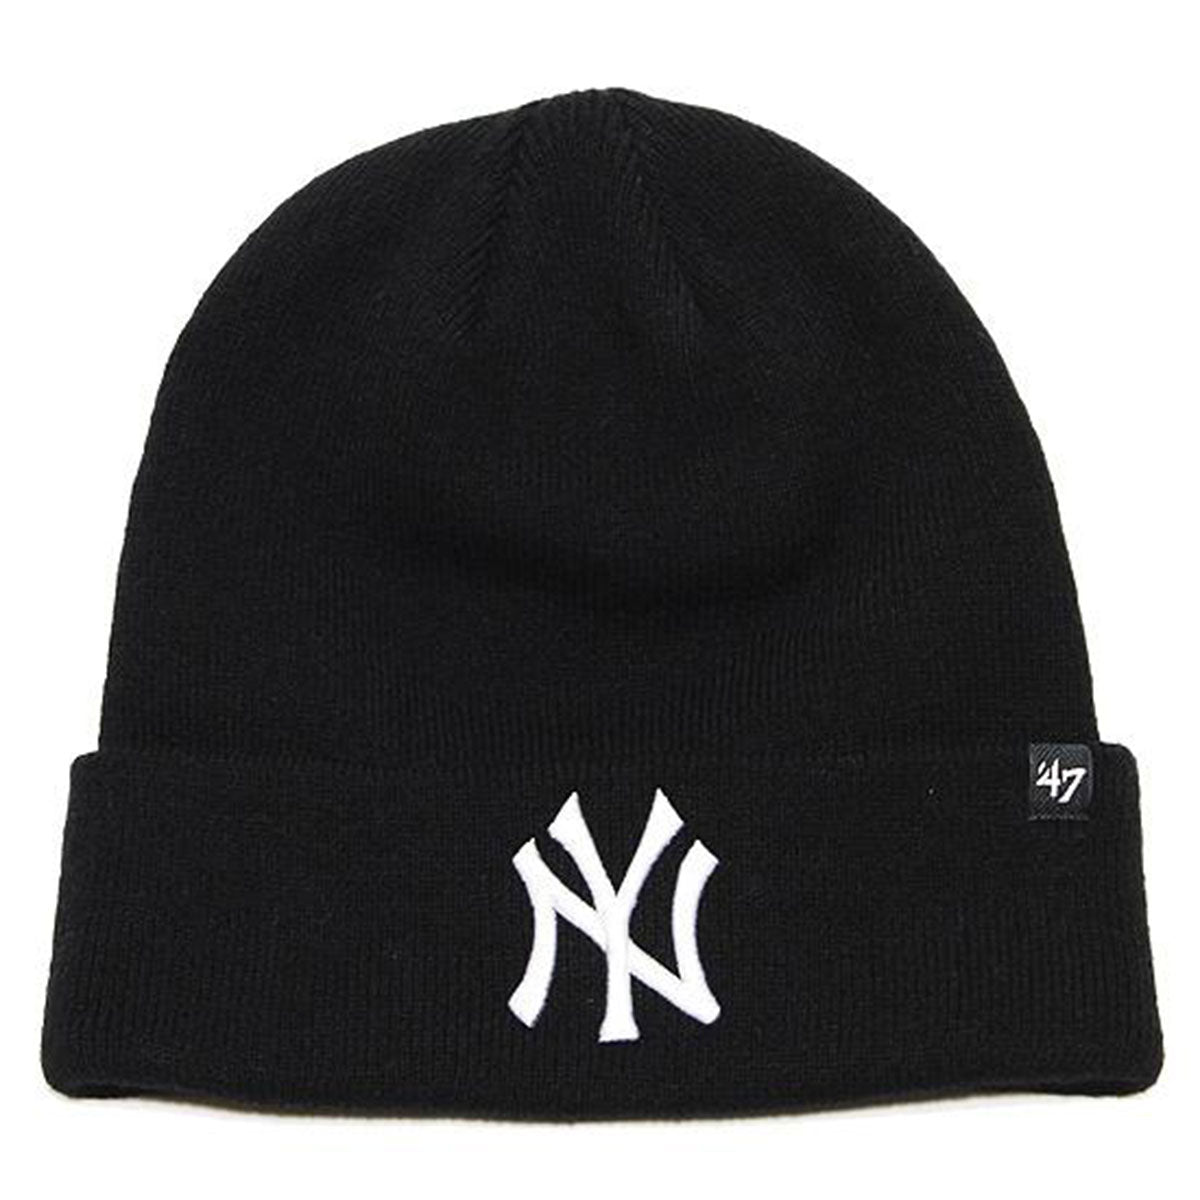 ’47 BRAND Yankees Raised '47 Cuft Knit 【RKN17ACE】